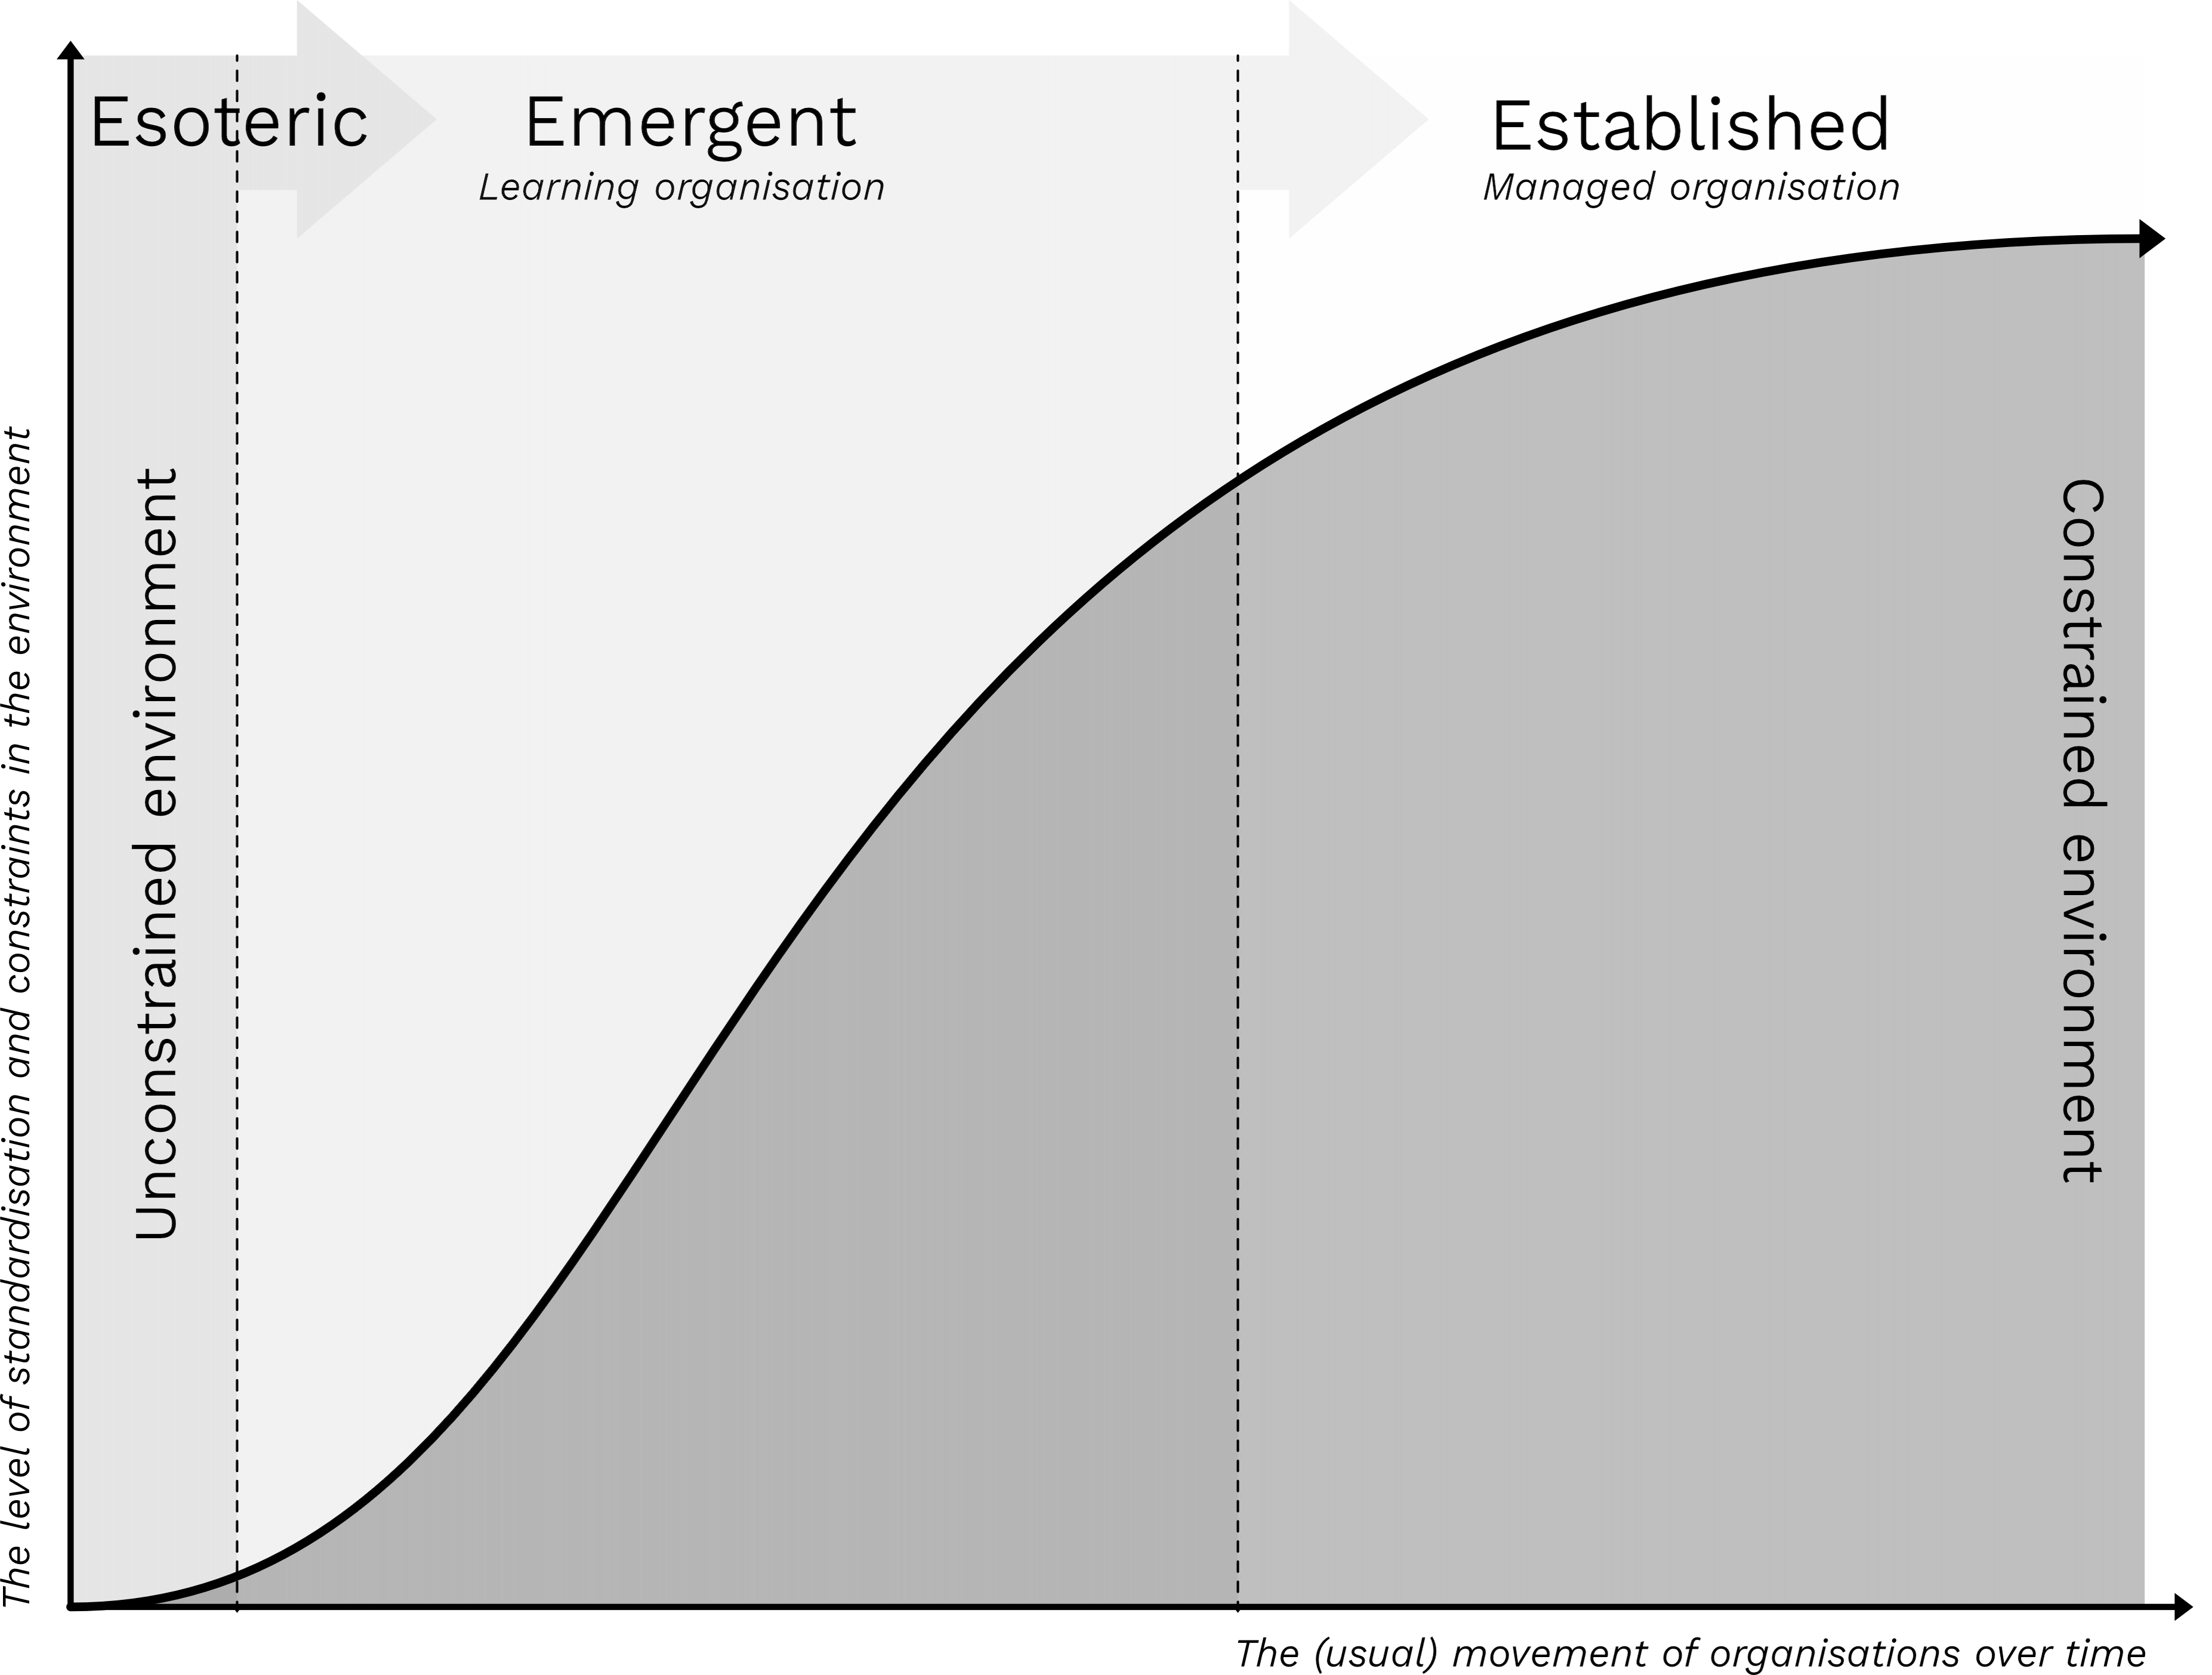 
A diagram with 2 axis. The X axis is labelled the 'the (usual) movement of organisations over time'. The Y axis is labelled 'the level of standarisation and constraints in the environment'. The volume increases from left to right. The left of the graph (where there are no constraints) is labelled 'esoteric', the middle of the graph (where there is a growing number of constraints) is labelled 'emergent - learning organisation'. The right of the graph, with lots of orgs and high level of constraints, is labelled 'Established - managed organisation'.
